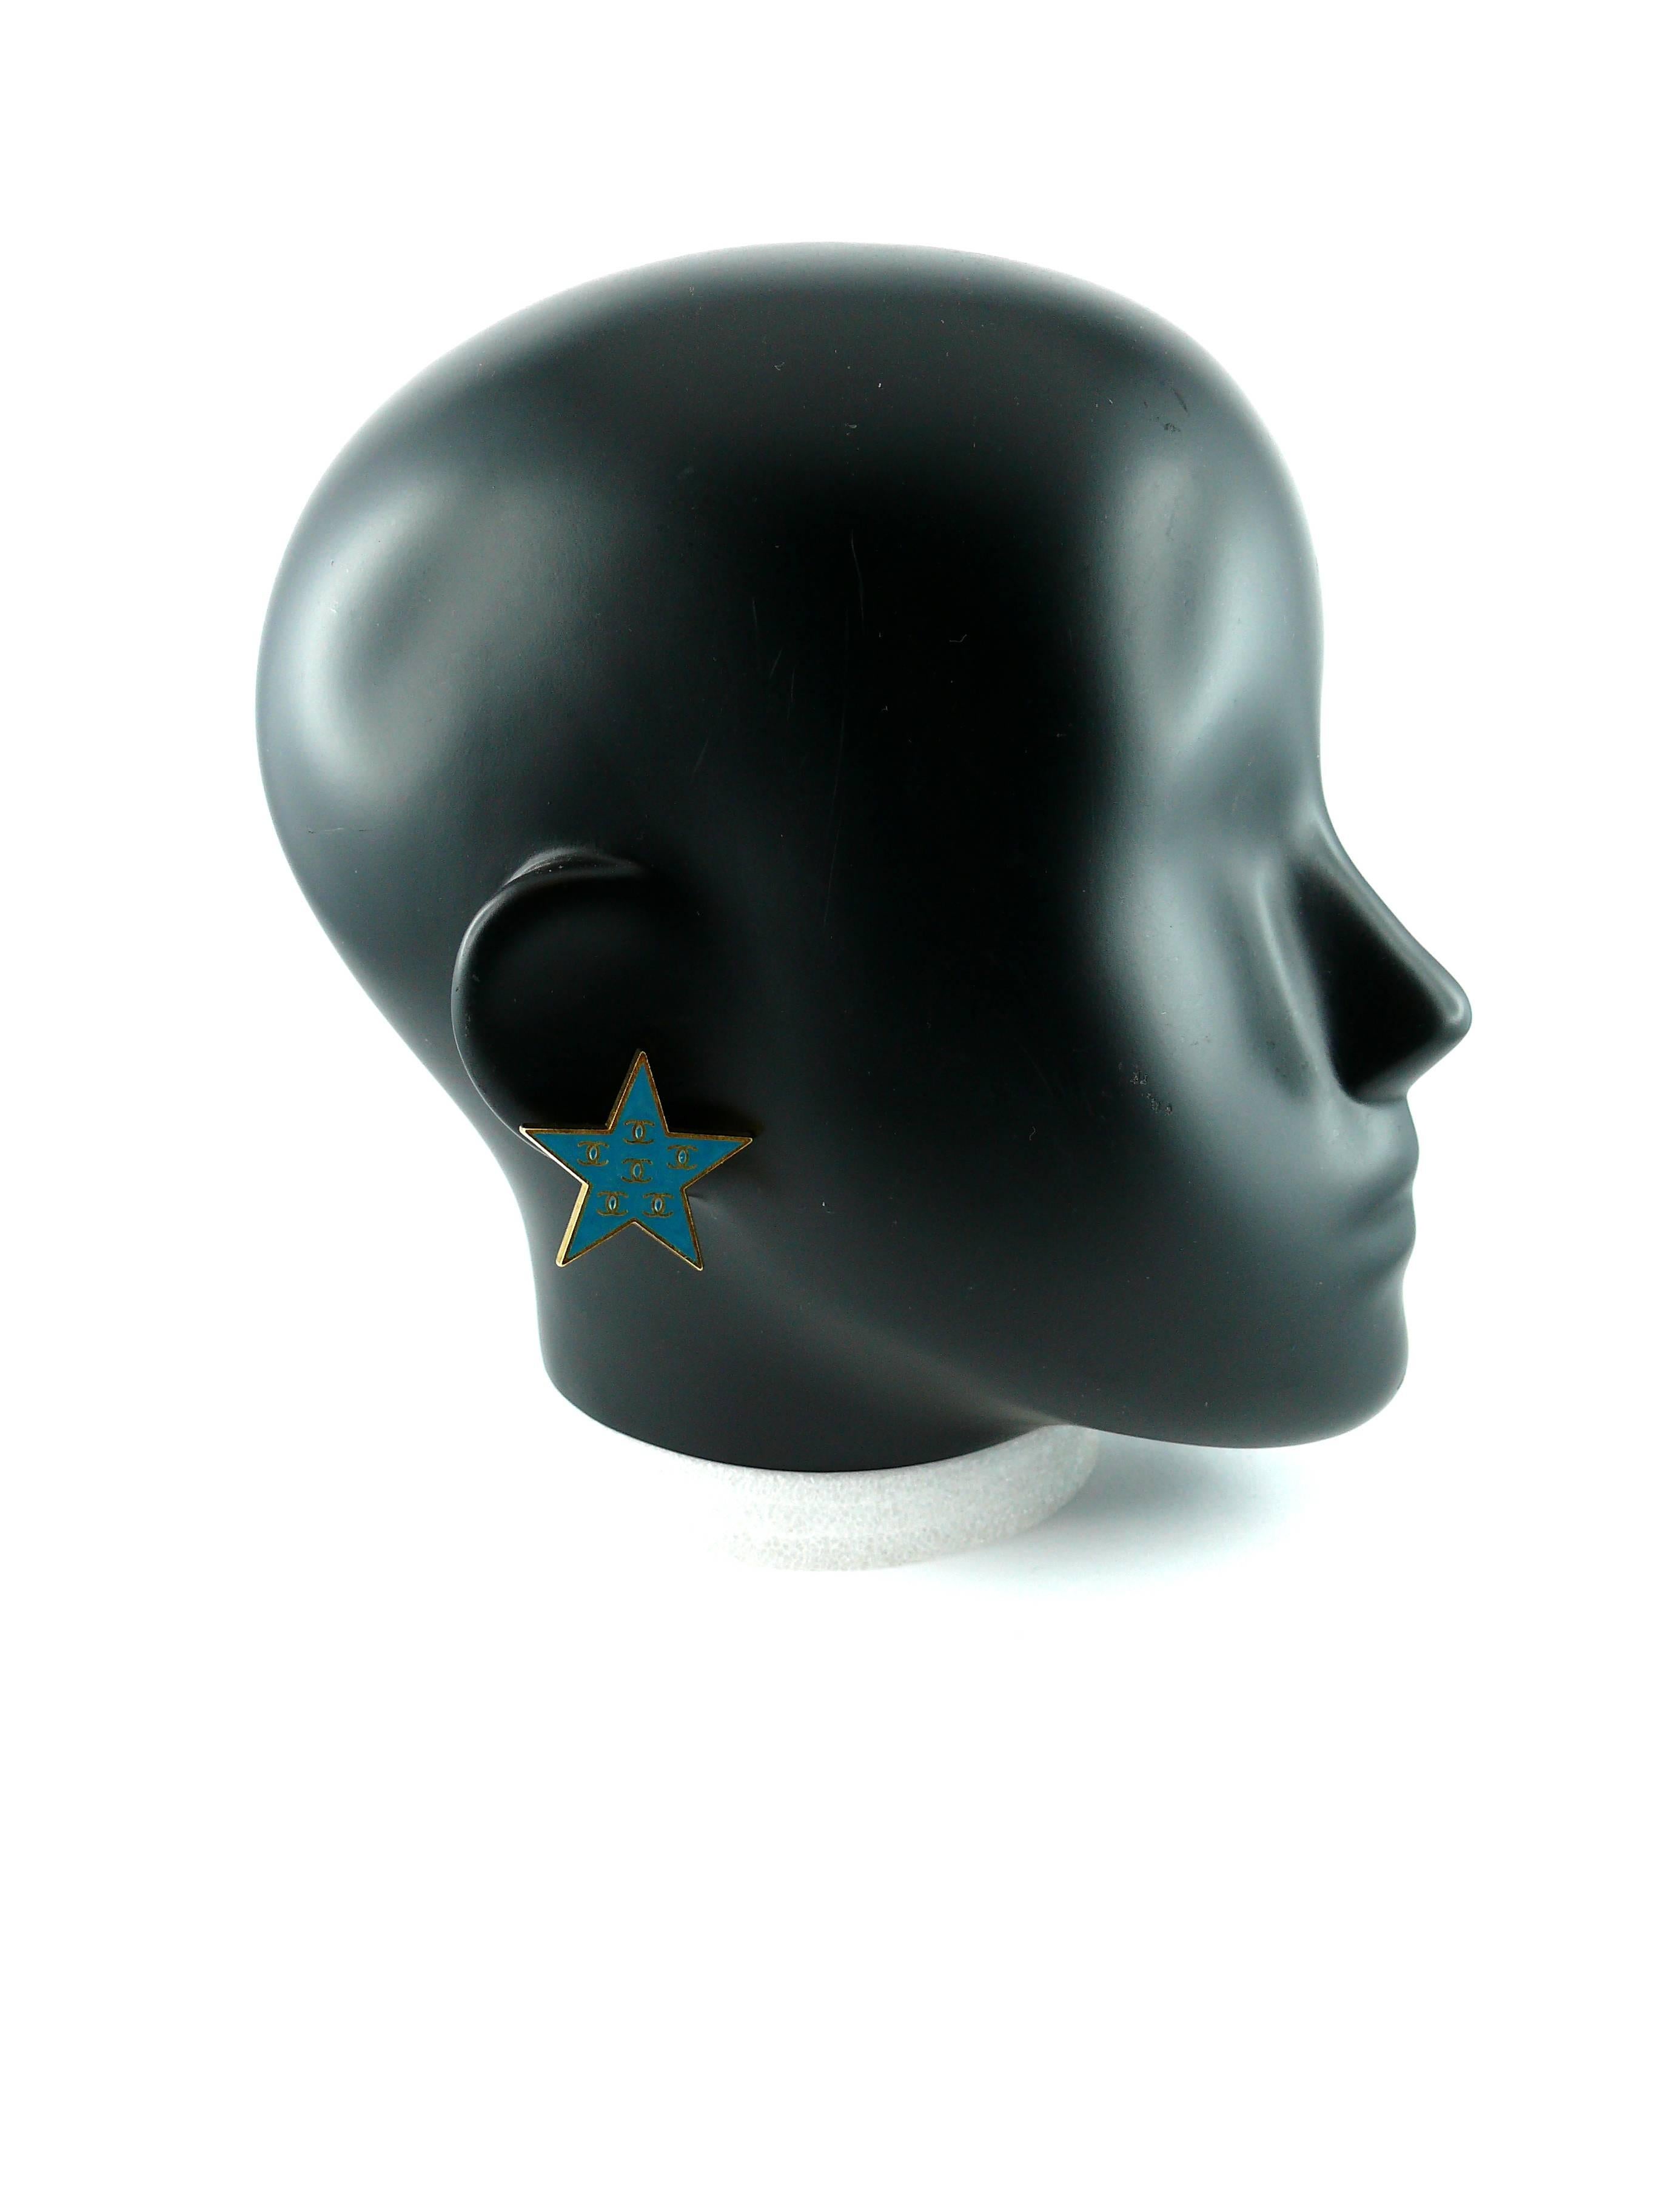 Chanel  blue enamel clip-on earrings featuring a star with CC monograms.

Spring 2001 Collection.

Marked Chanel 01 P Made in France.

Comes with original box.

JEWELRY CONDITION CHART
- New or never worn : item is in pristine condition with no